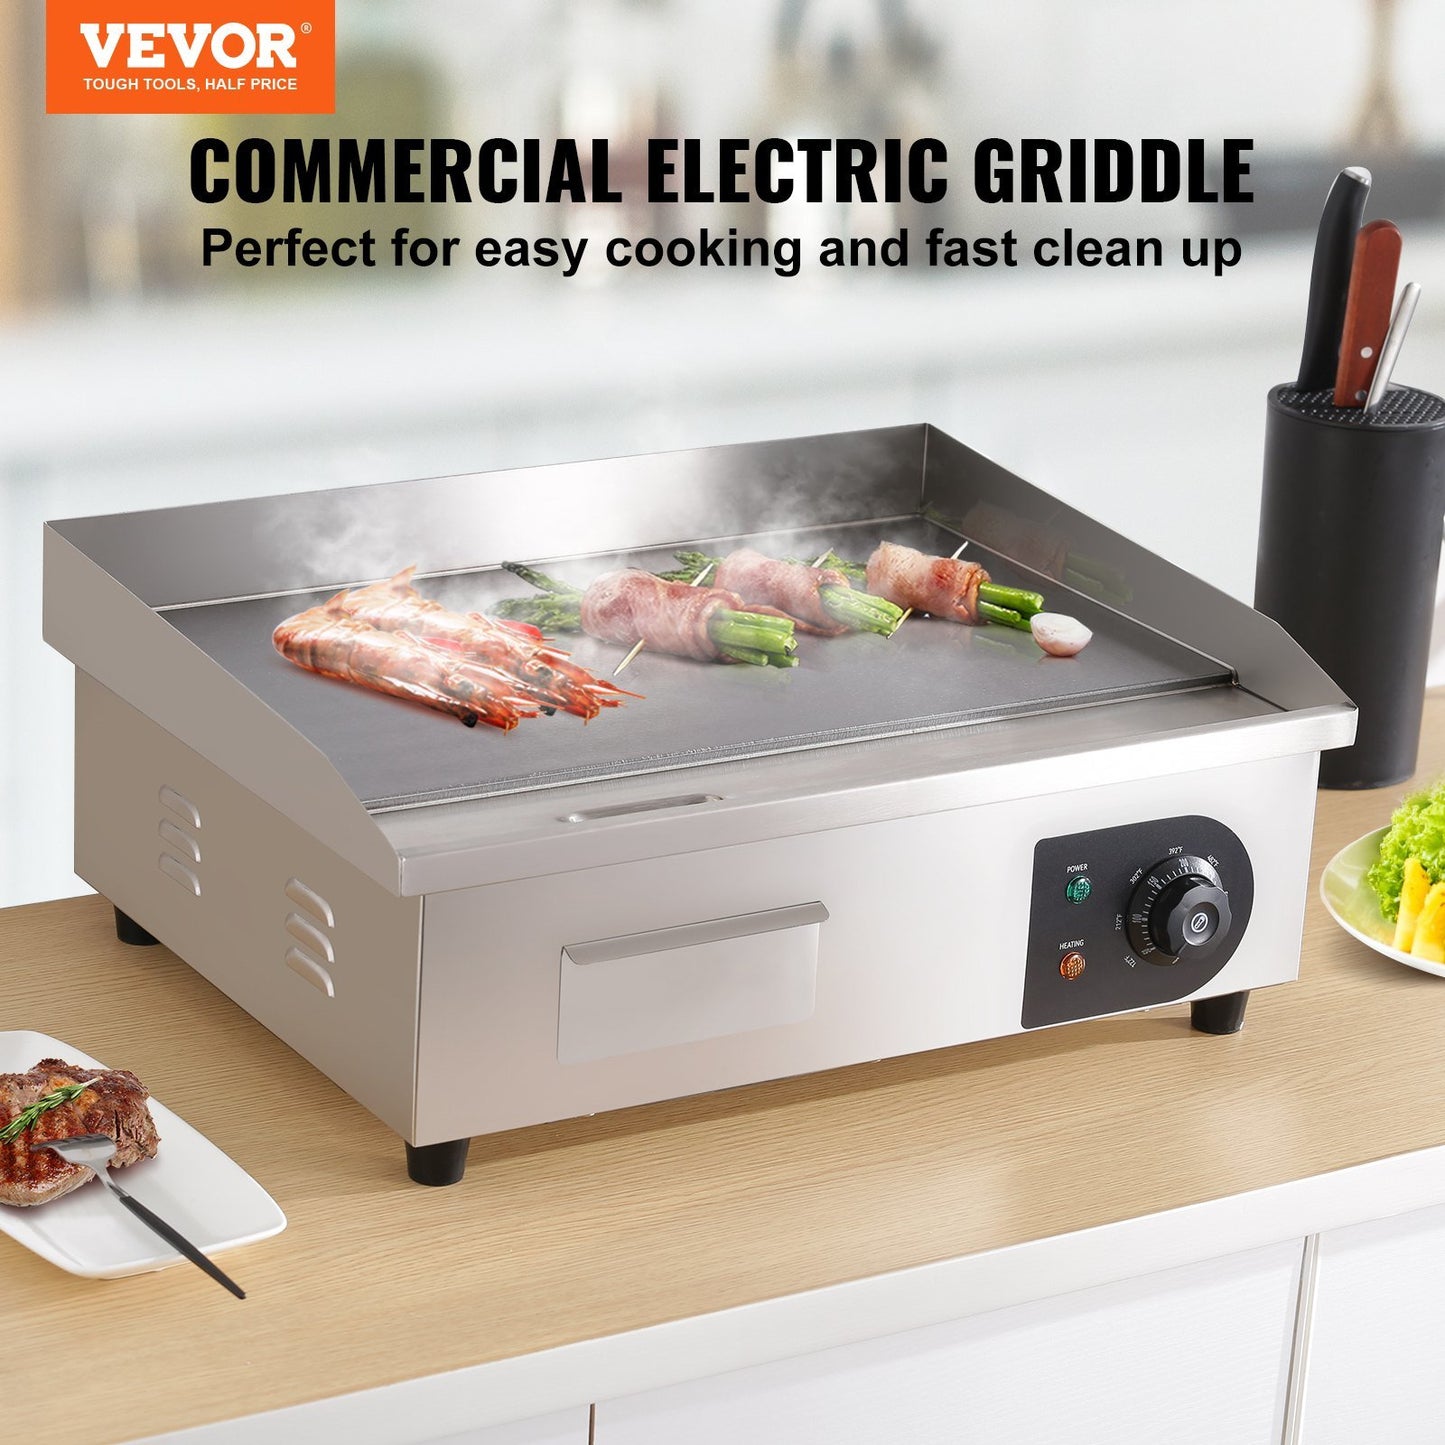 VEVOR Commercial Electric Griddle, 21", 1600W Countertop Flat Top Grill, Stainless Steel Teppanyaki Grill, 122-572 degree Fahrenheit Adjustable Temp Control 2 Shovels & Brushes,